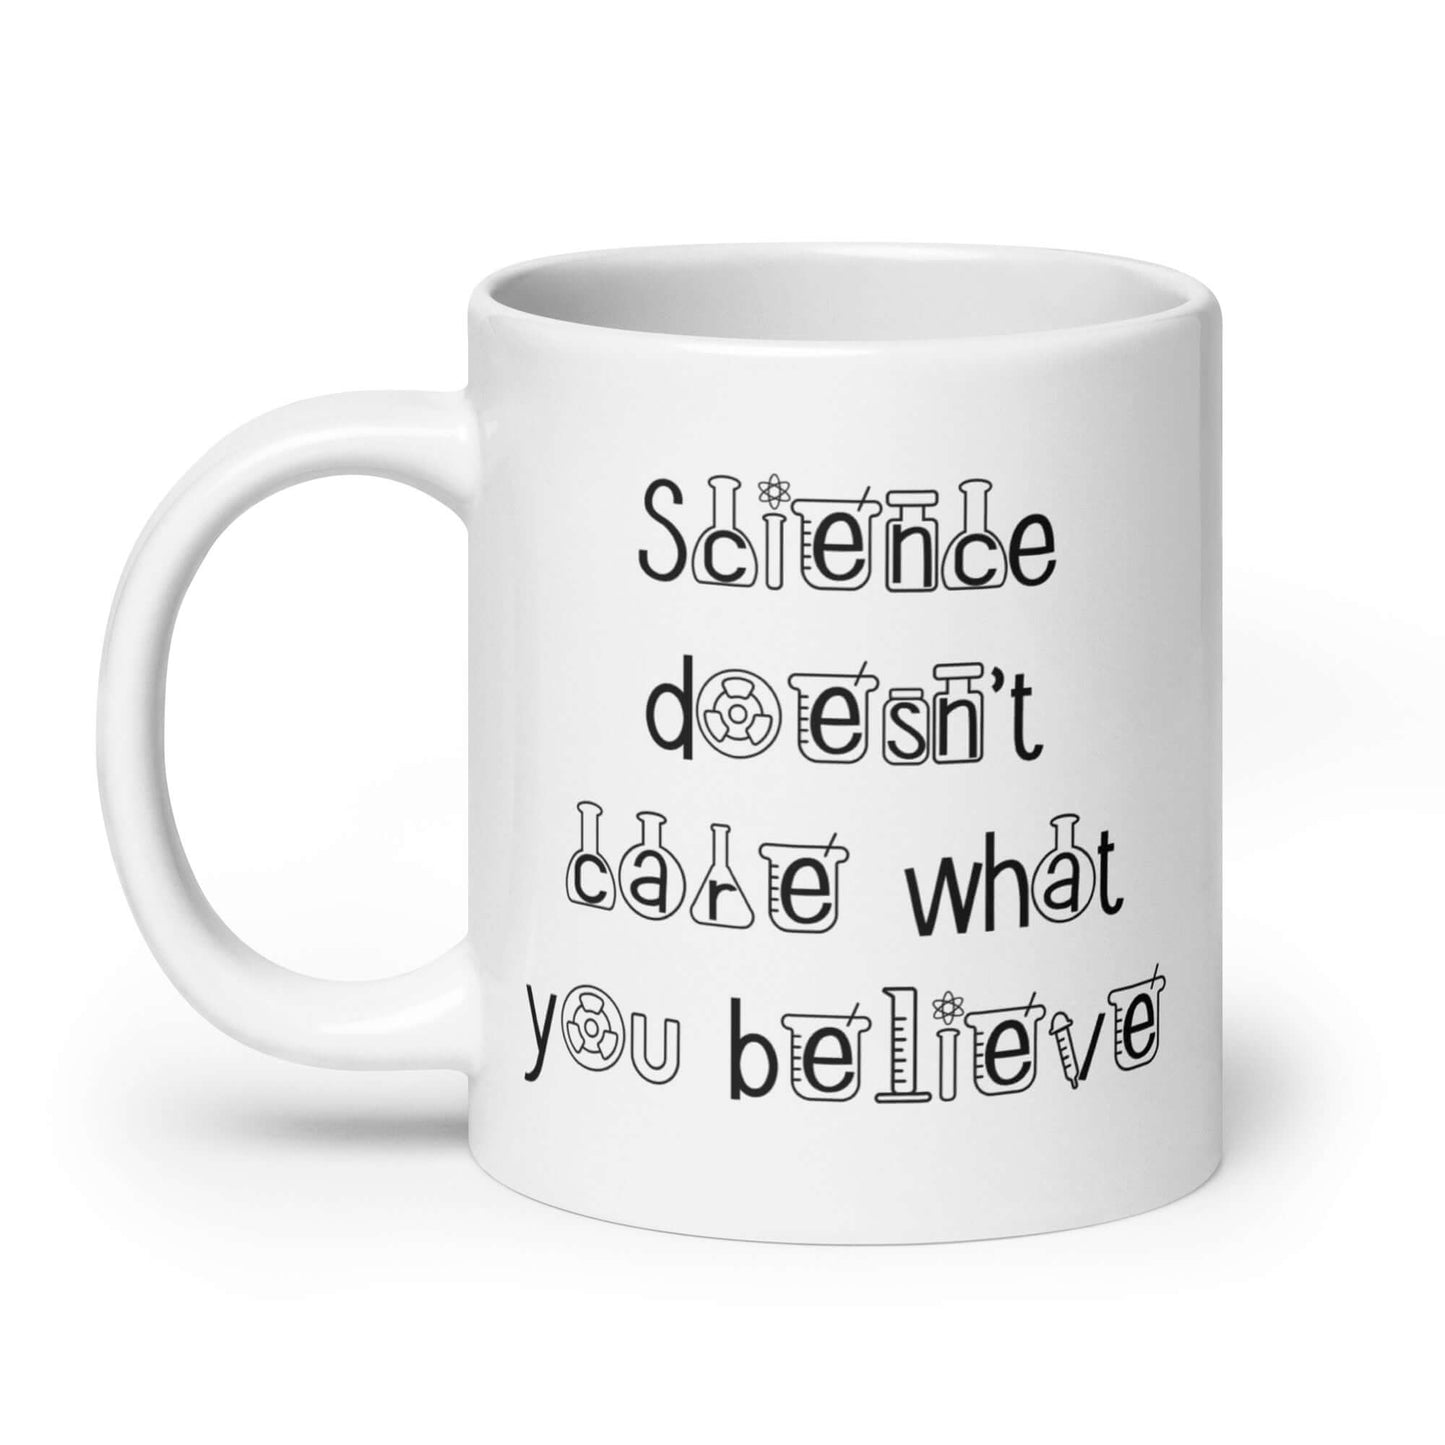 Science doesn't care what you believe ceramic mug.